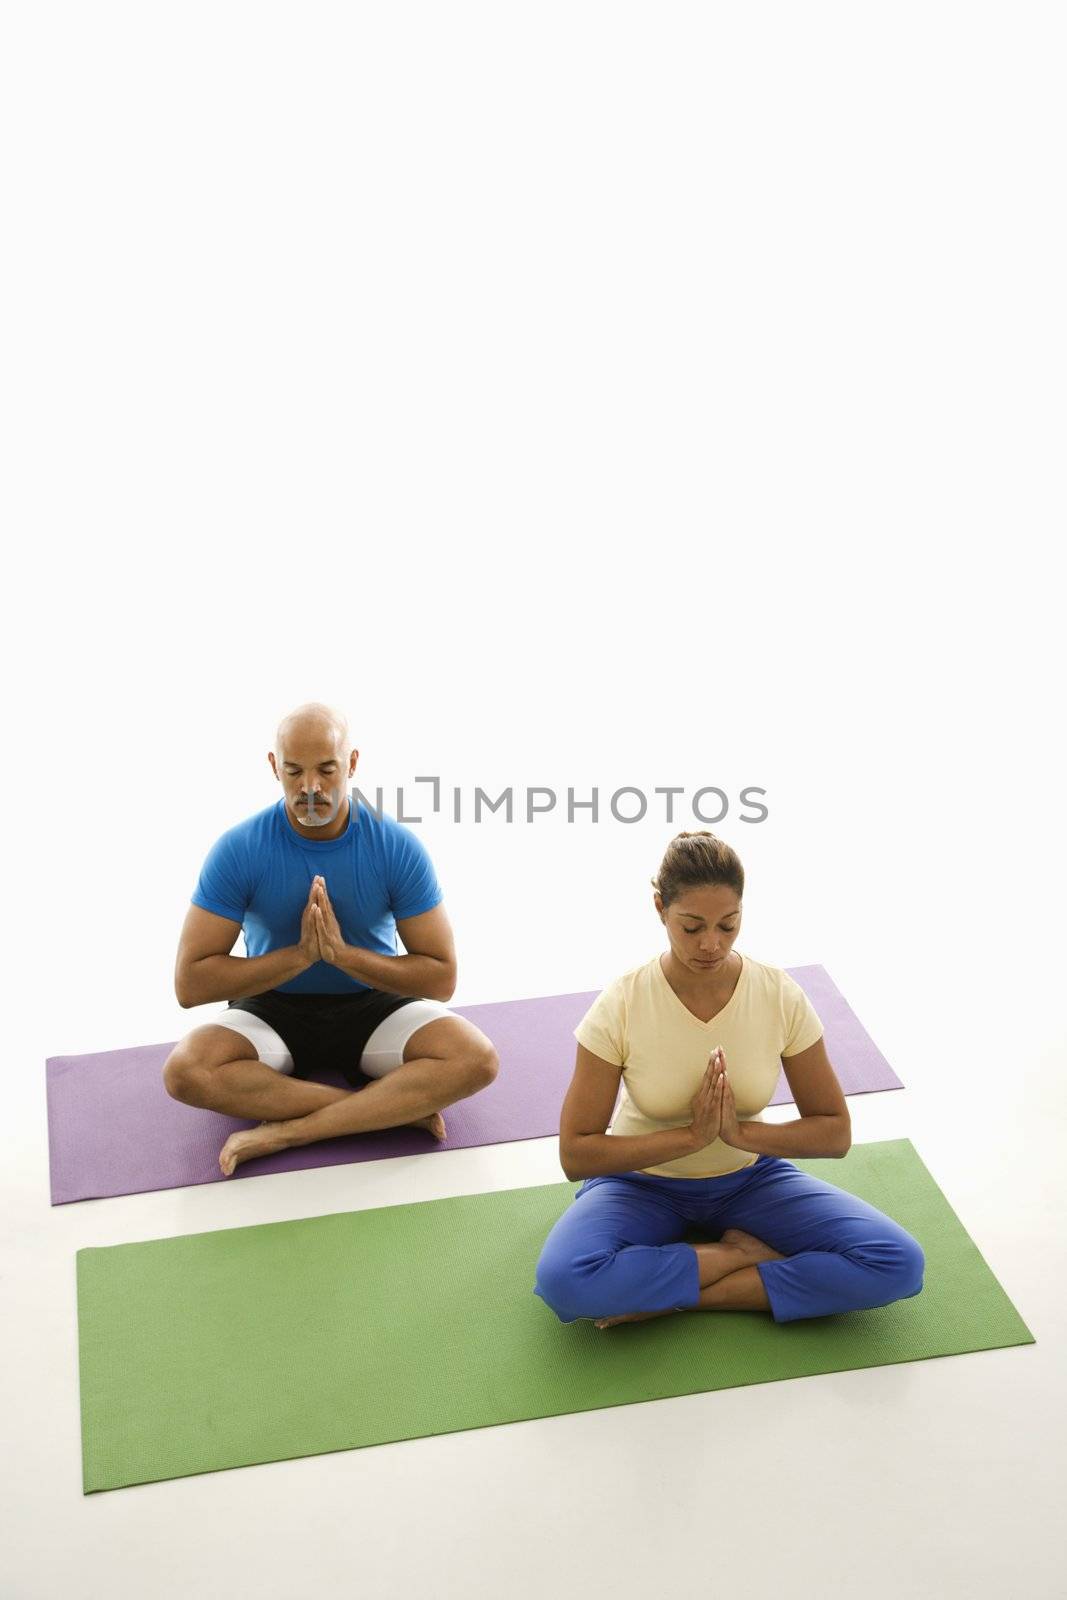 Mid adult multiethnic man and woman sitting in Namaste position on exercise mats with eyes closed and hands at heart center.